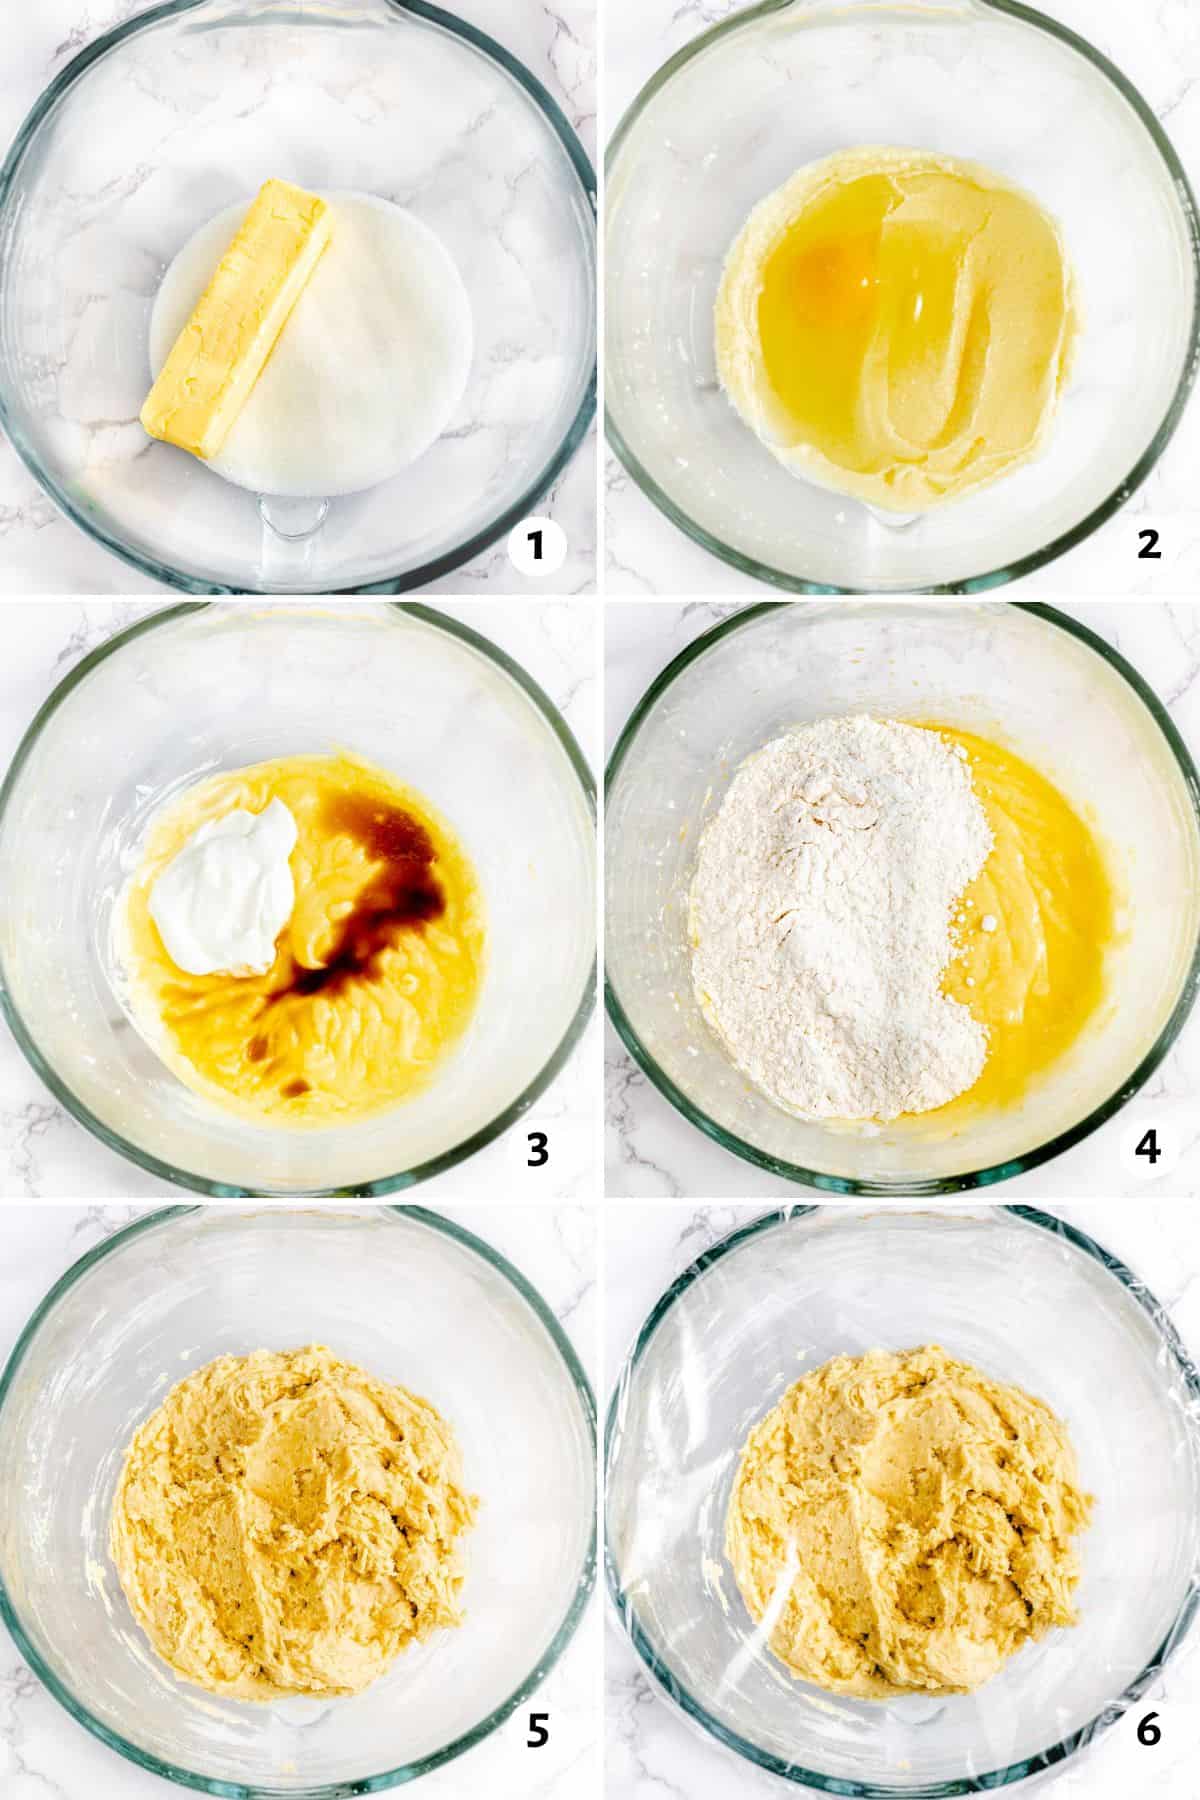 6 image collage making dough in the bowl of a stand mixer: 1- butter and sugar before creaming together, 2- after creaming with egg added, 3- after mixing in egg with yogurt and extracts added, 4- dry ingredients added on top of mixture, 5- dough after completely combined, 6- plastic wrap over dough for refrigeration before baking.